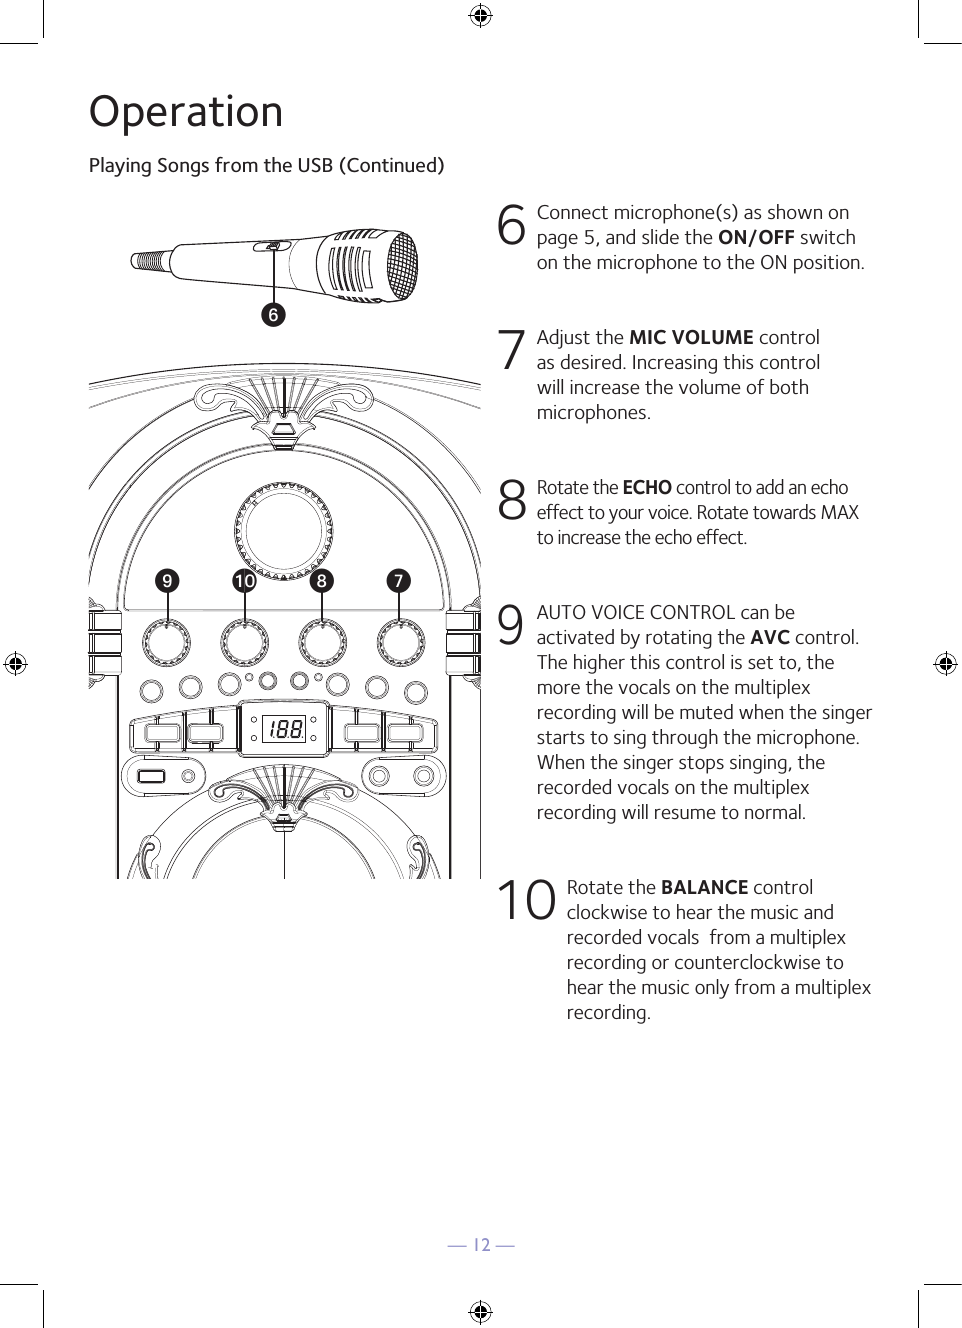 — 12 —OperationPlaying Songs from the USB (Continued)6  Connect microphone(s) as shown on page 5, and slide the ON/OFF switch on the microphone to the ON position.7  Adjust the MIC VOLUME control as desired. Increasing this control will increase the volume of both microphones.8  Rotate the ECHO control to add an echo effect to your voice. Rotate towards MAX to increase the echo effect.9 AUTO VOICE CONTROL can be activated by rotating the AVC control. The higher this control is set to, the more the vocals on the multiplex recording will be muted when the singer starts to sing through the microphone. When the singer stops singing, the recorded vocals on the multiplex recording will resume to normal.10  Rotate the BALANCE control clockwise to hear the music and recorded vocals  from a multiplex recording or counterclockwise to hear the music only from a multiplex recording.UVWatX